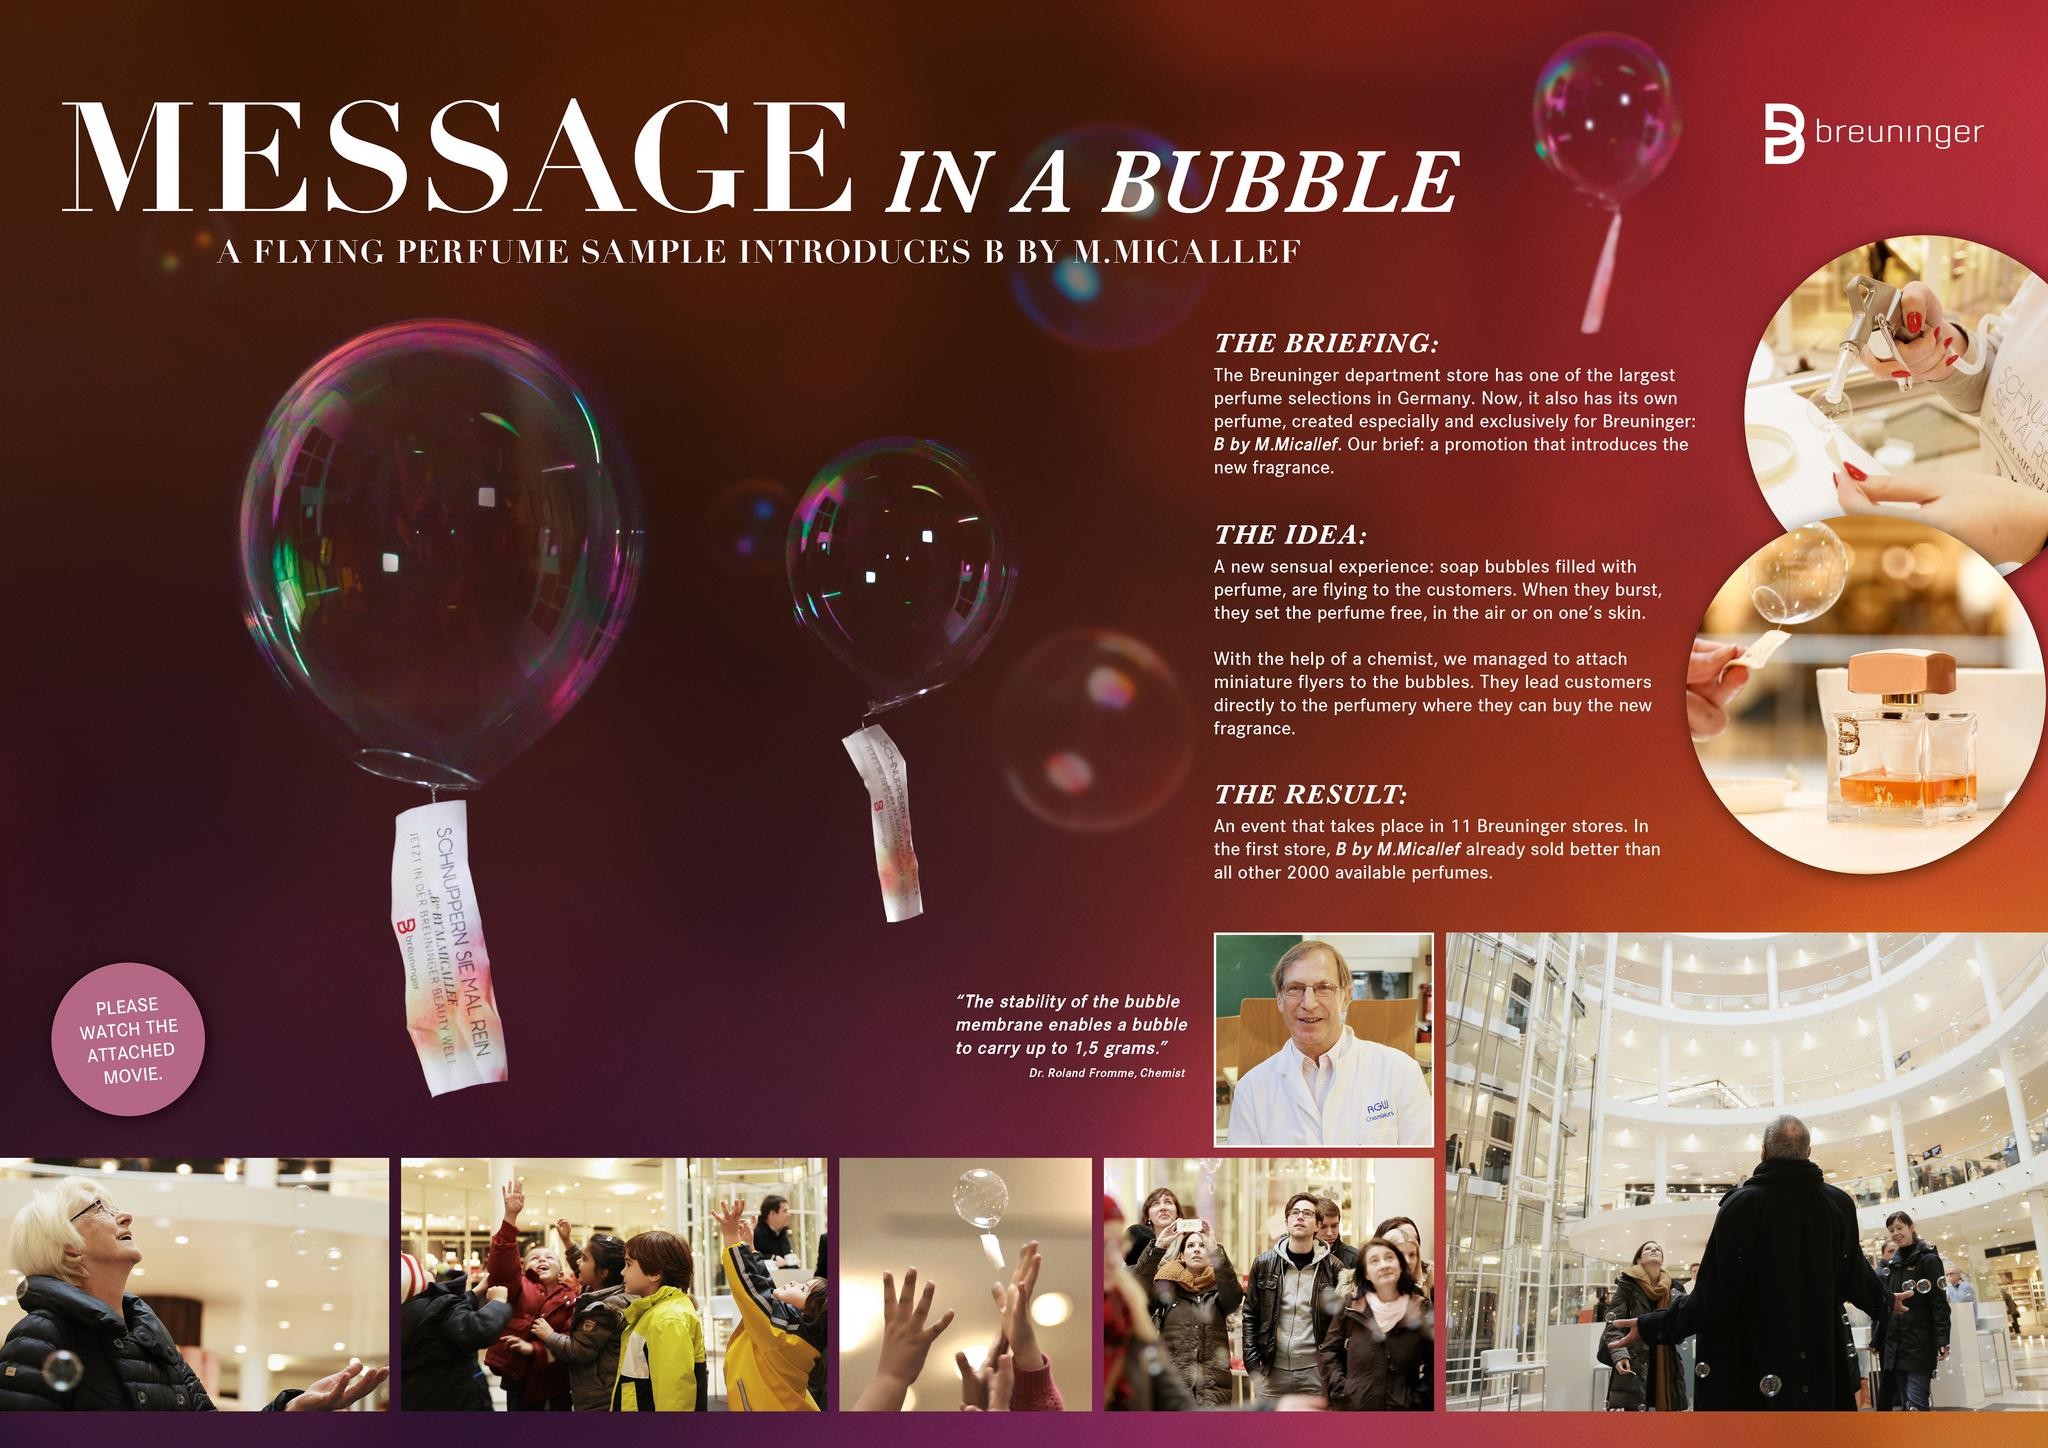 MESSAGE IN A BUBBLE